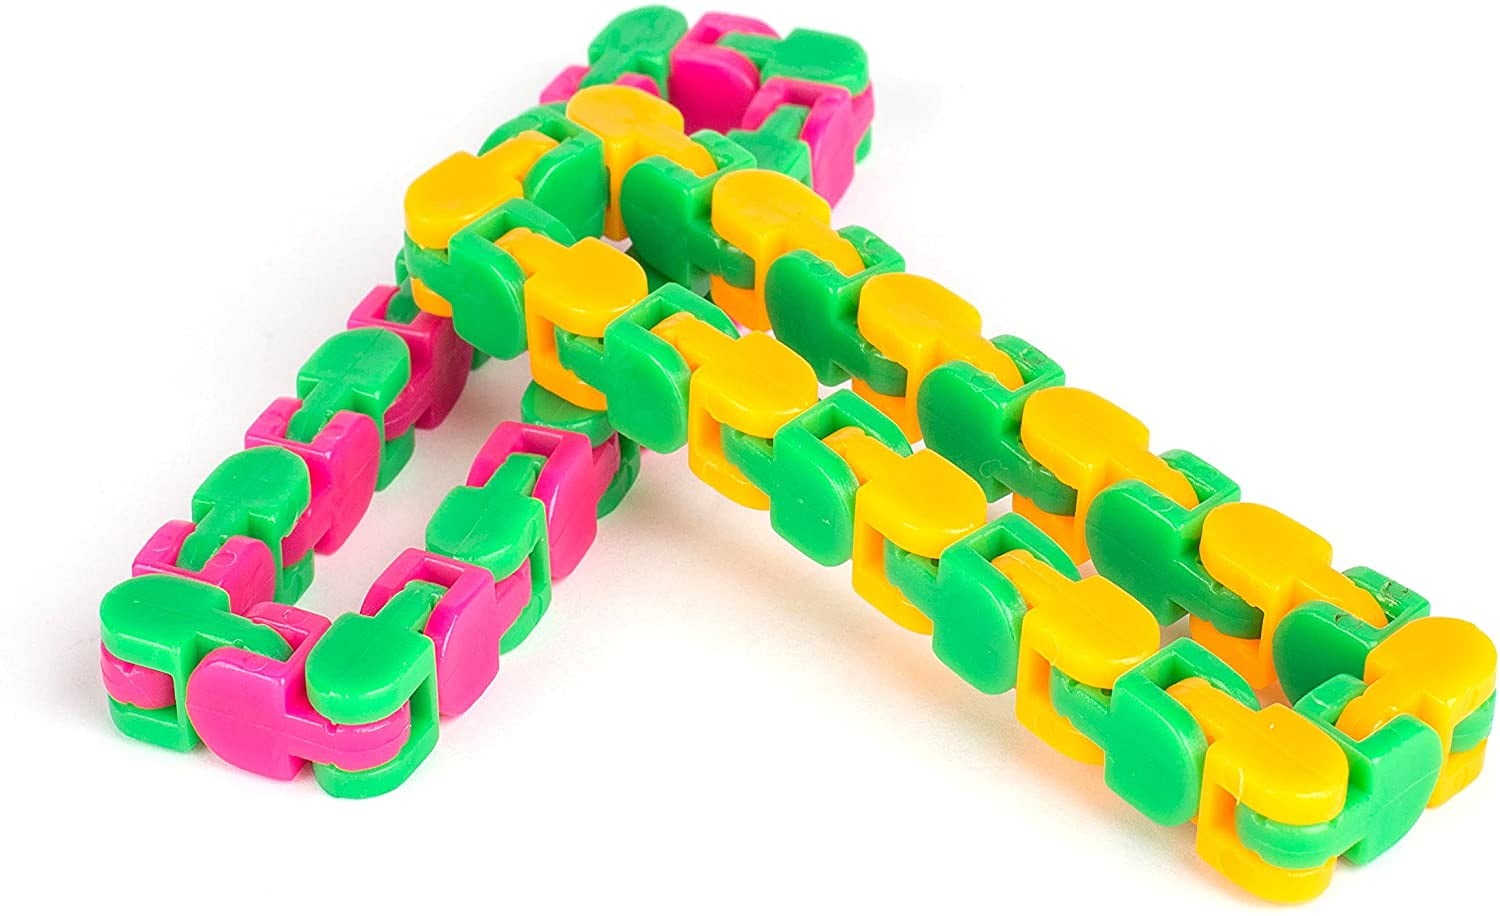 Autism Stress Relief Keeps Fingers Busy and Minds Focused Wacky Tracks Sensory Fidget Toys Snap and Click Fidget Chain Toys Snake Puzzles Bulk for Kids Adults ADHD